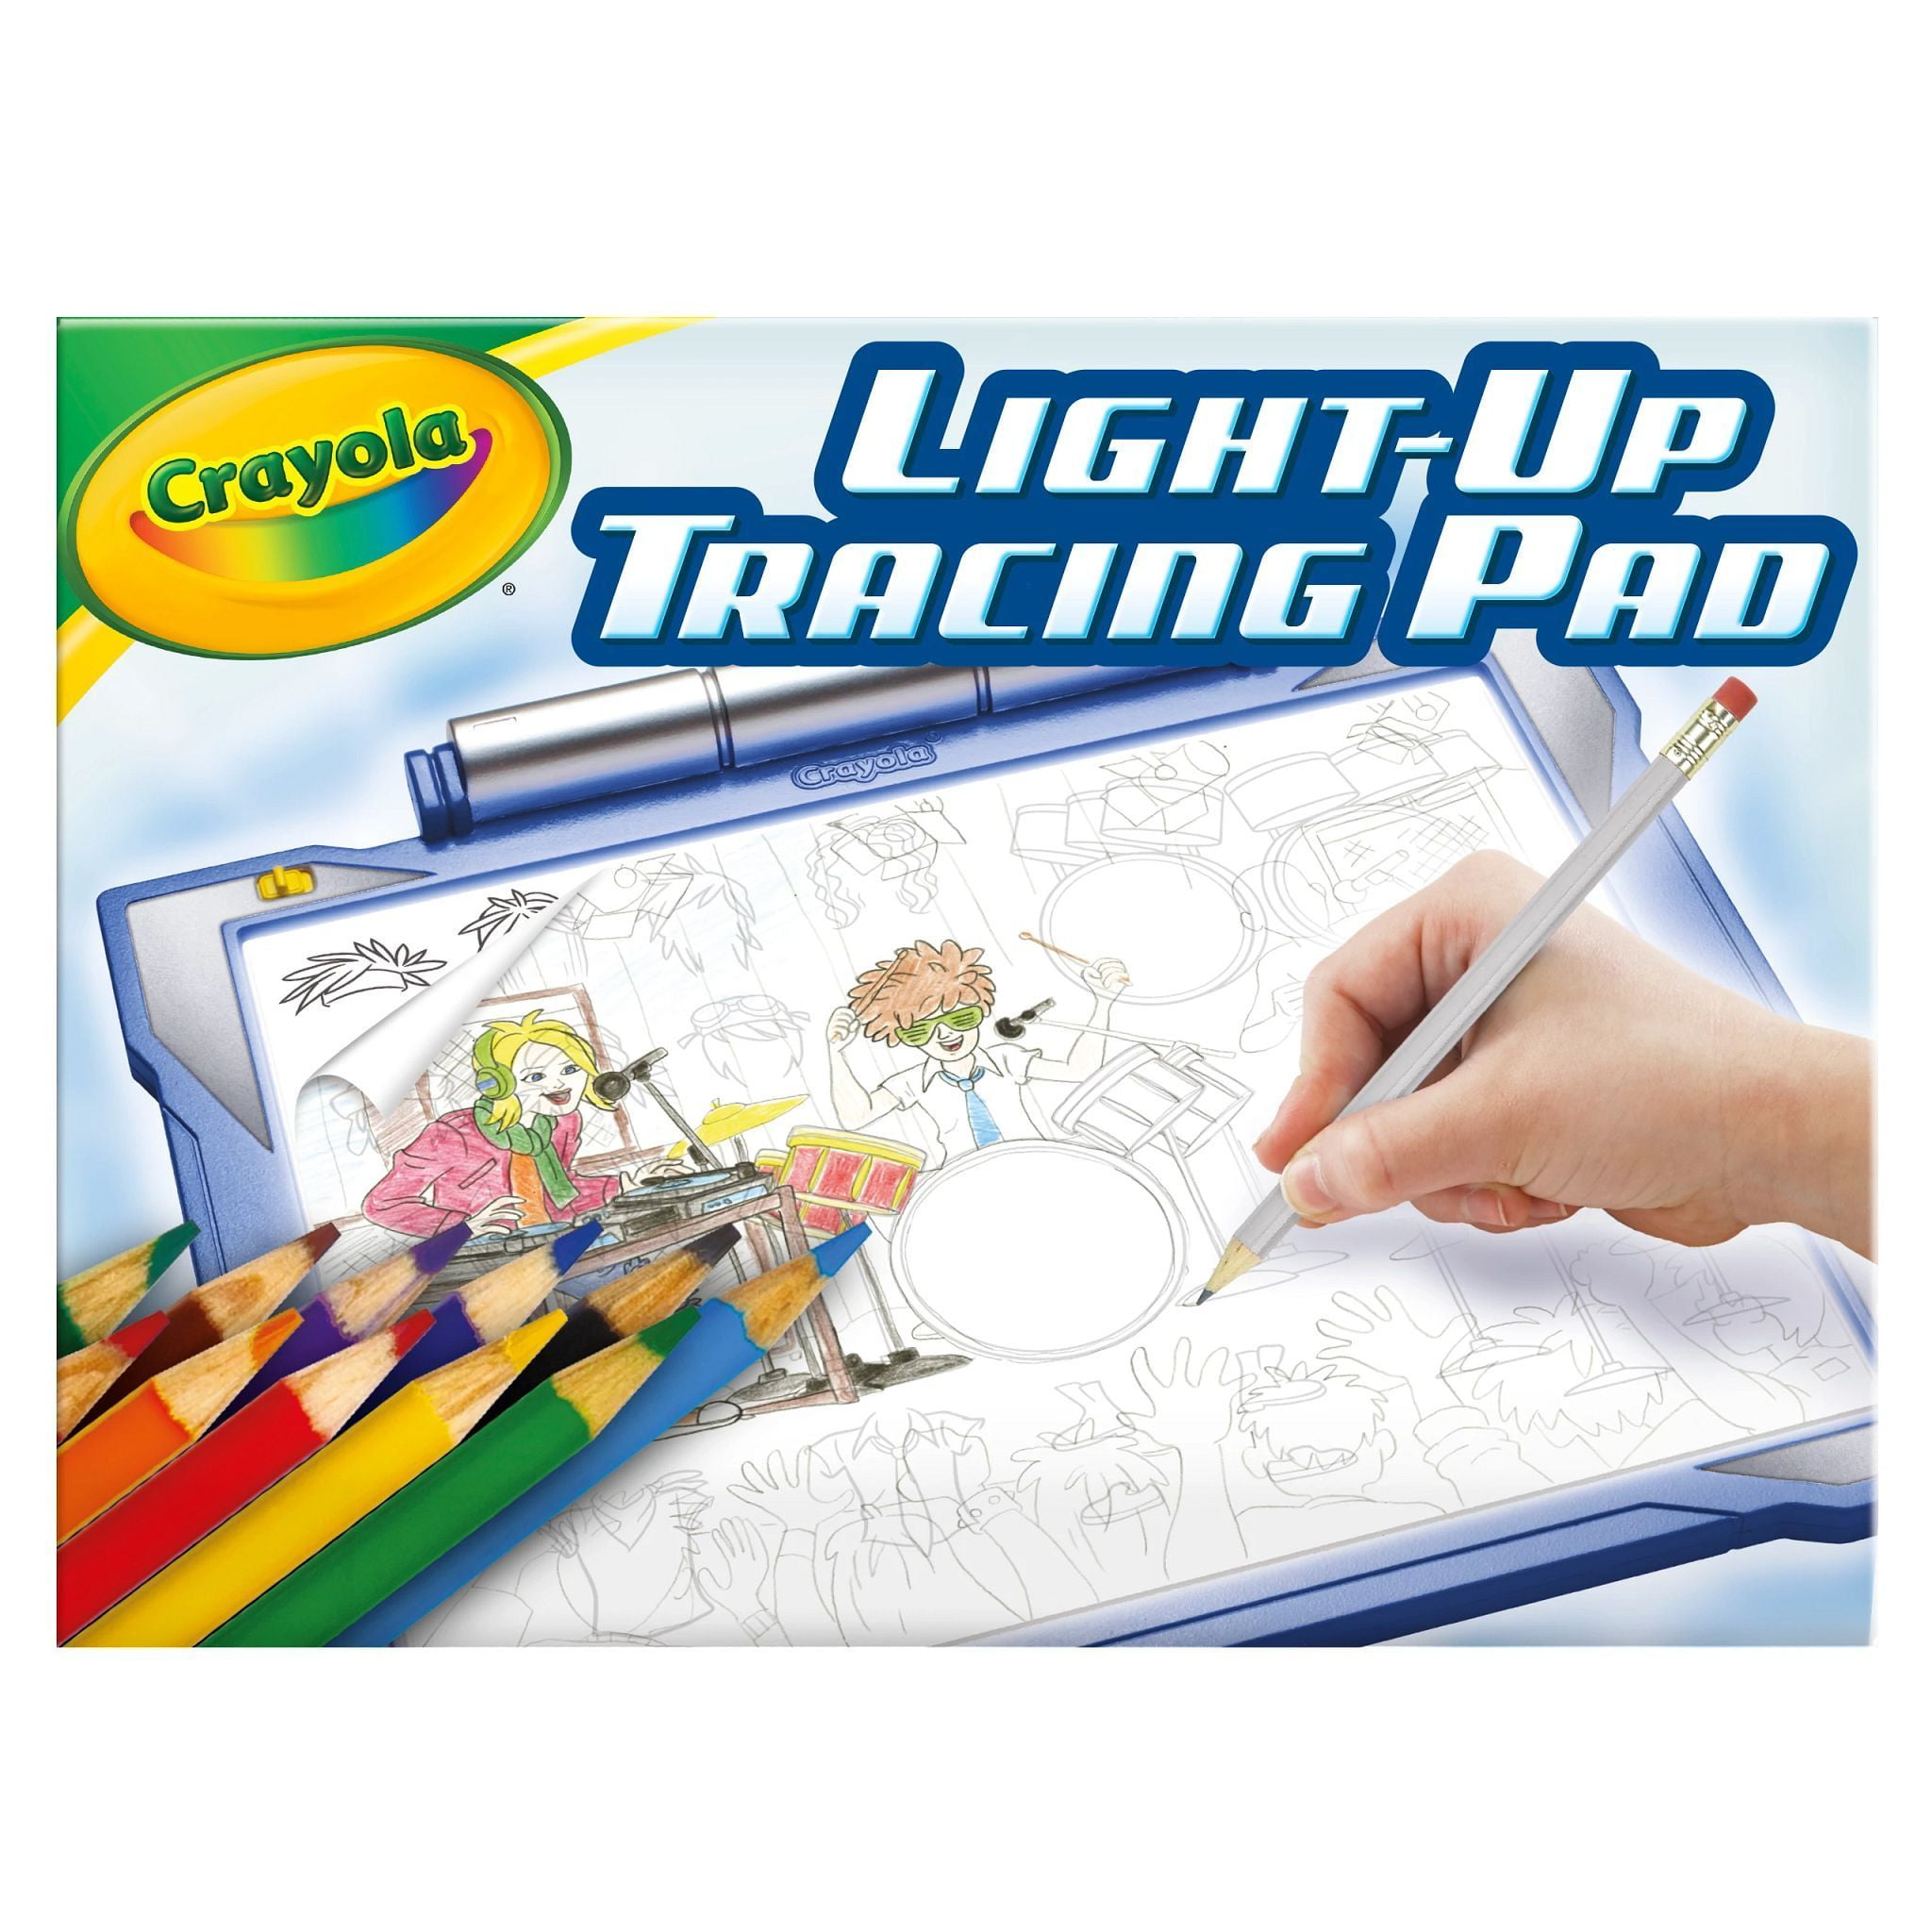 Crayola; Light-up Tracing Pad; Blue; Art Tool; Bright LEDs; Easy Tracing  with